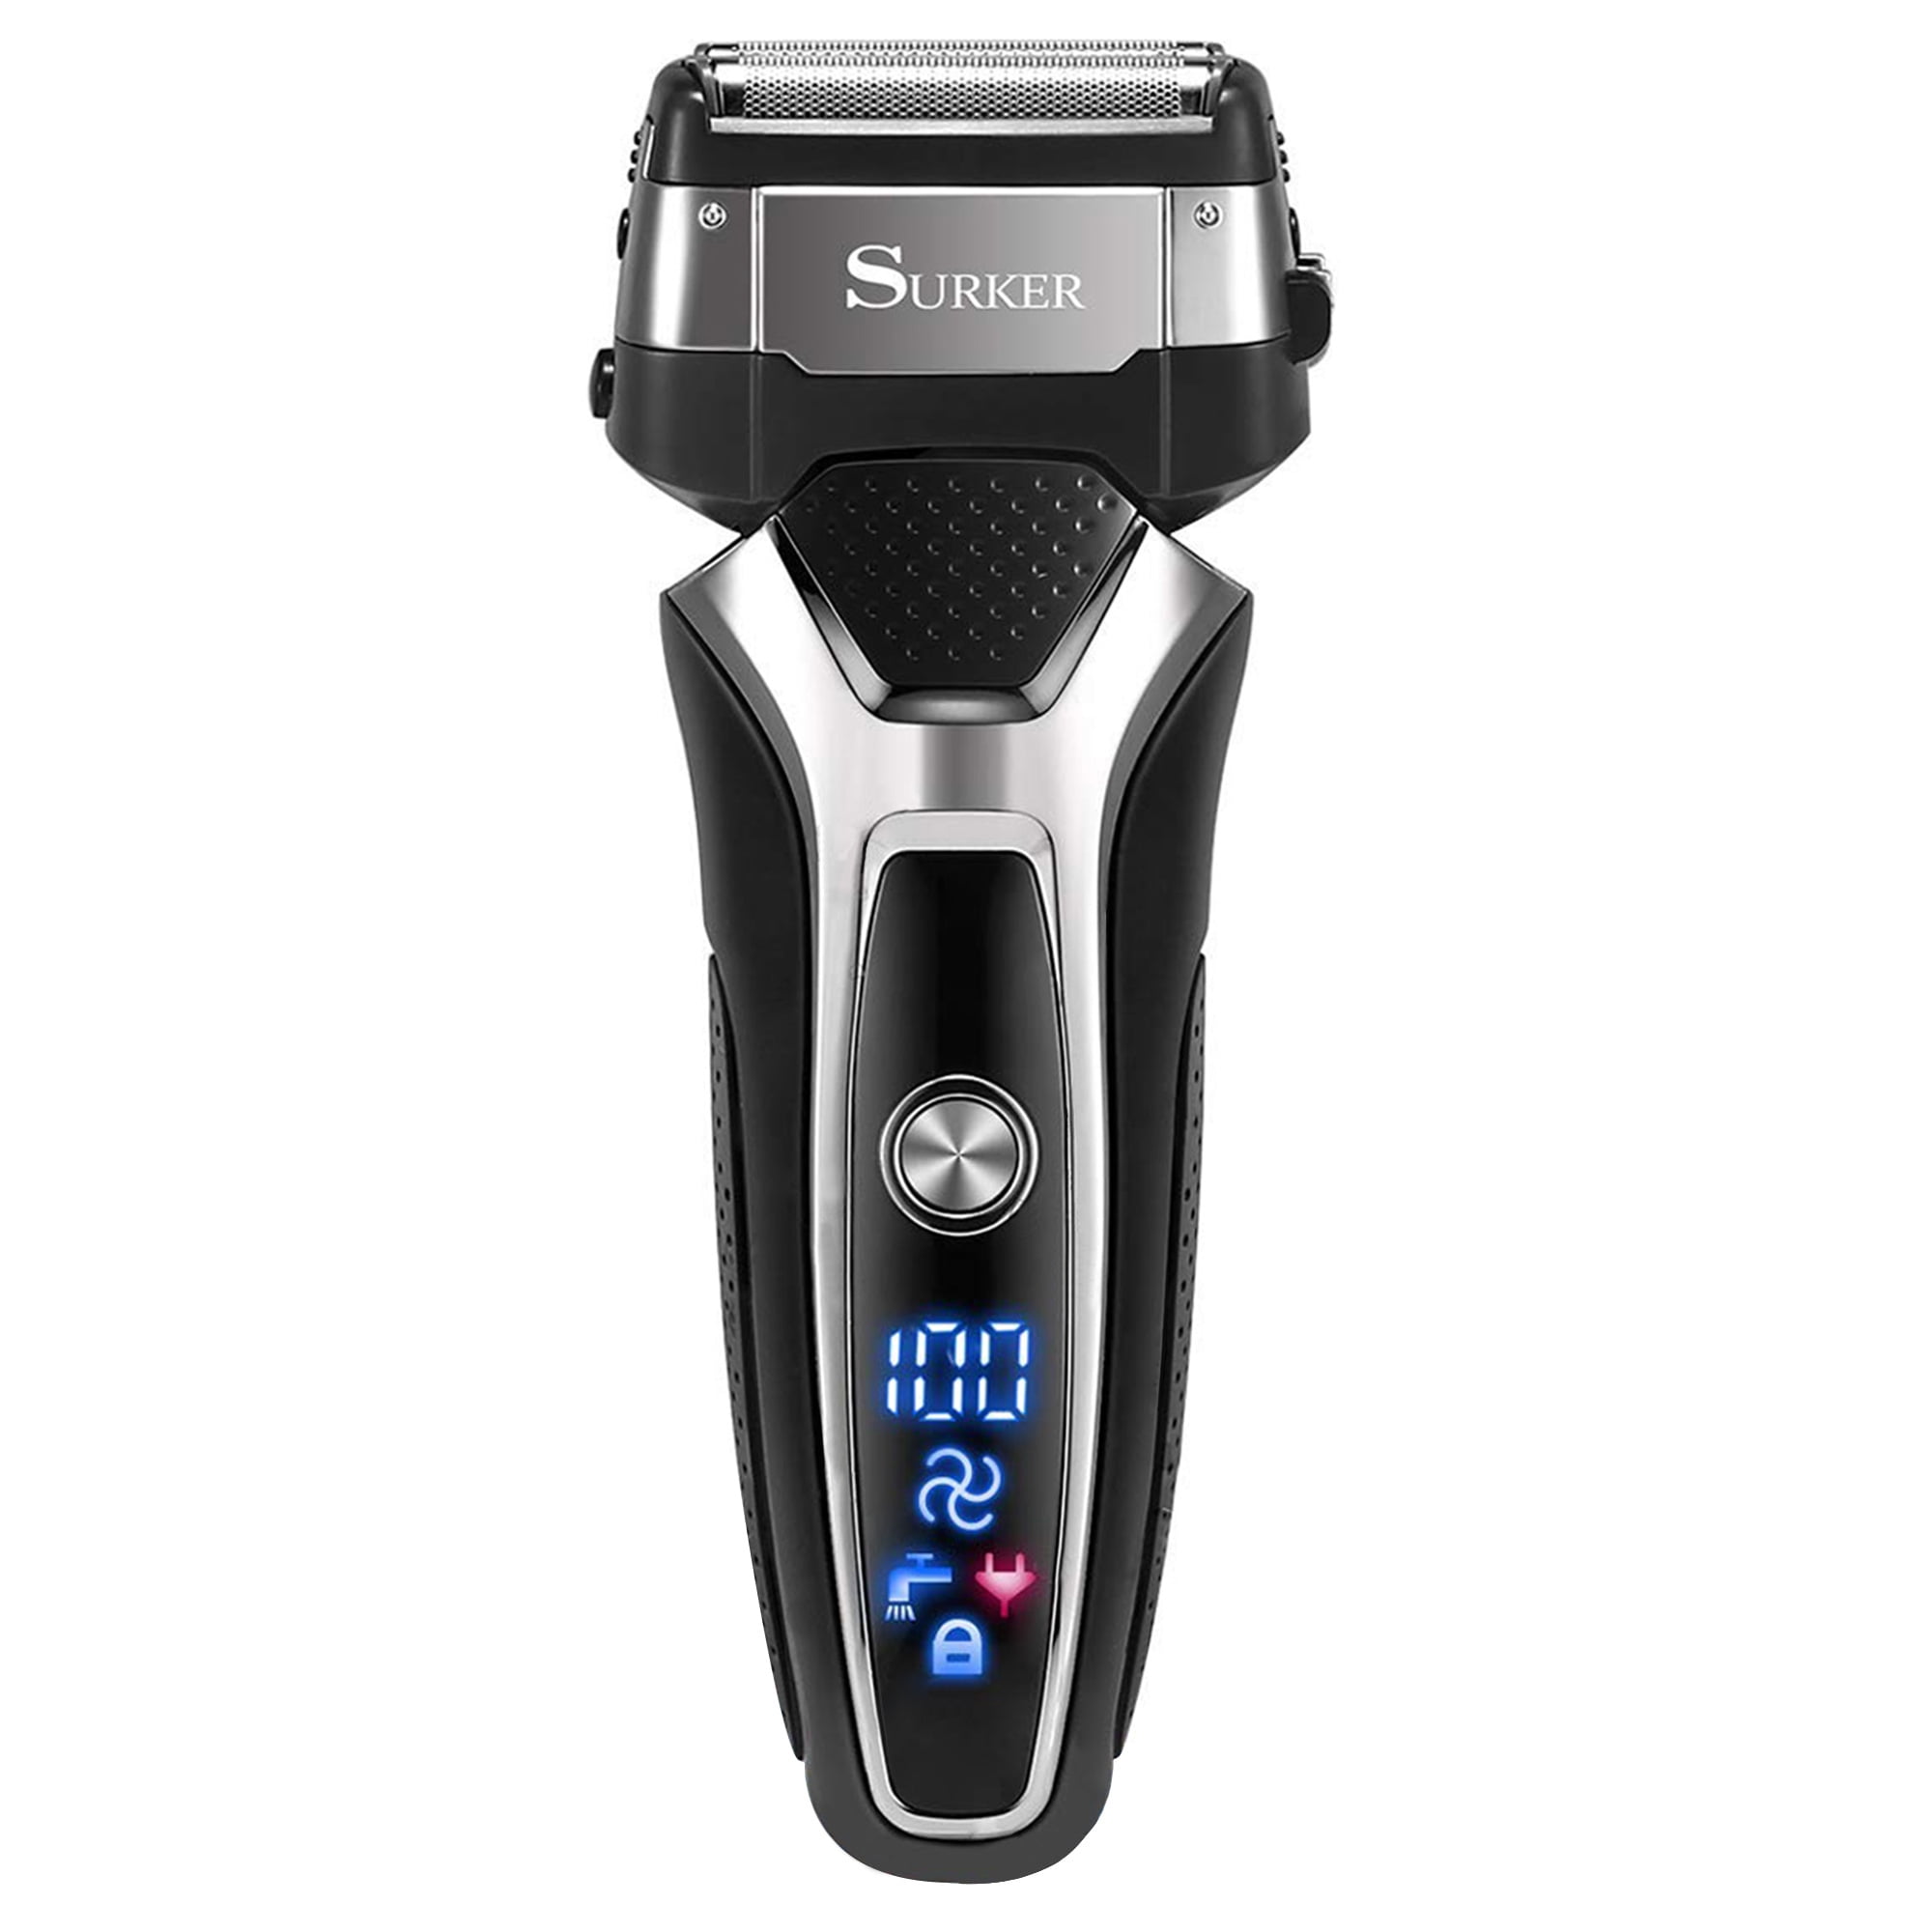 braun shaver and trimmer all in one